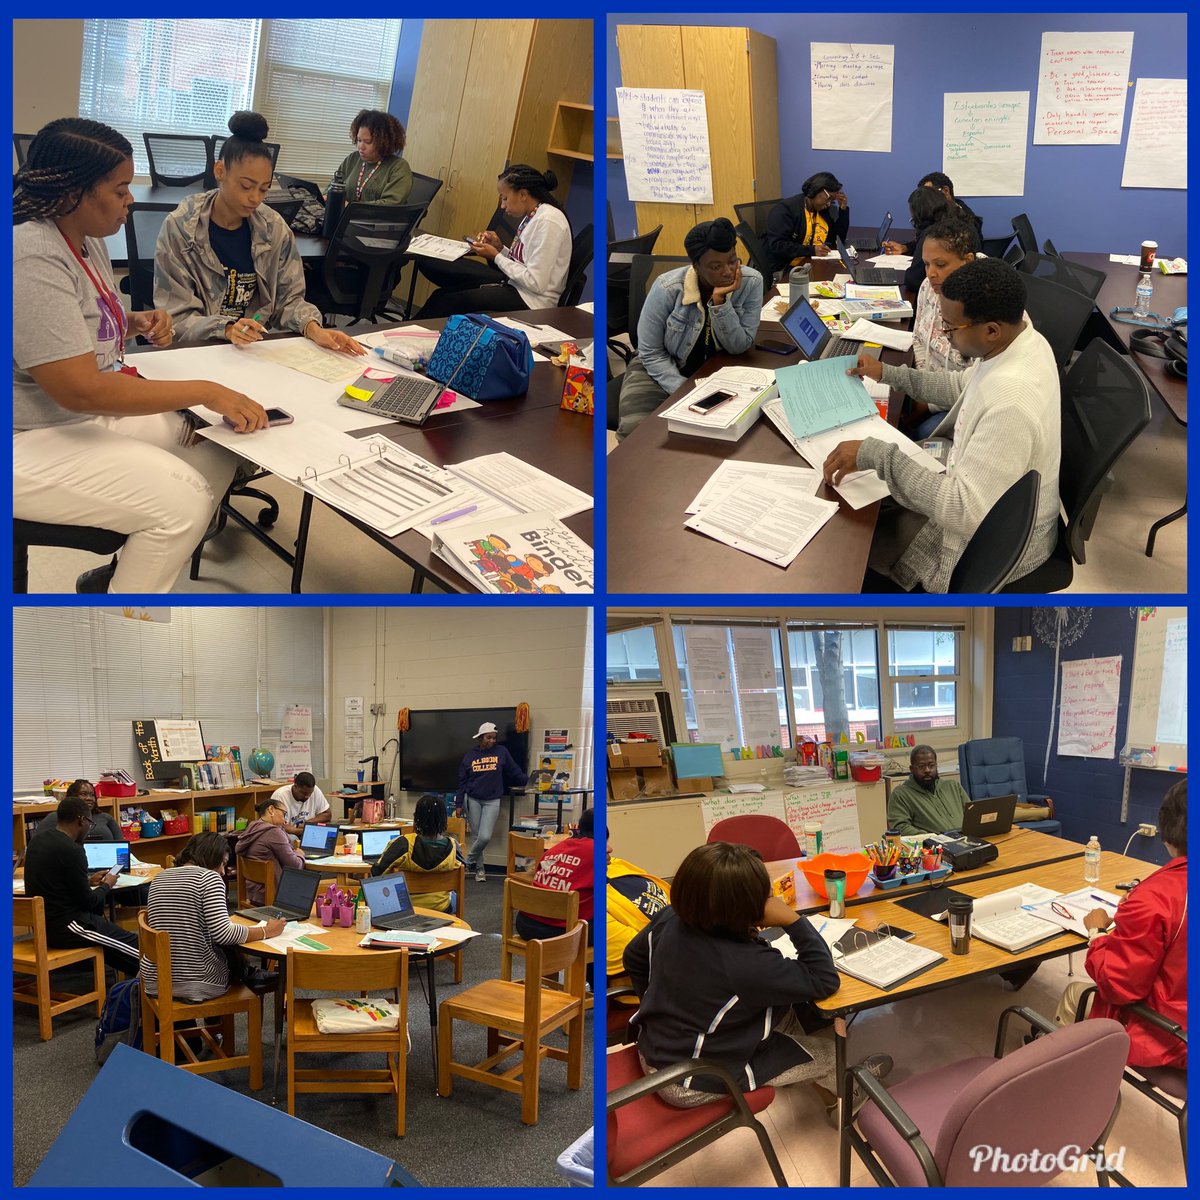 What an amazing day of professional learning @APSBenteen! Thank you @AKhan_EdS @apslat @SoontobeEdD  @DrLenice for leading academically today!! @DrEmilyAMassey @Learn2dayCT @IBinAPS @swellsheard @L_Dubyou #focusedonthework #datastategies #sharedreading #guidedreading #IBplanners